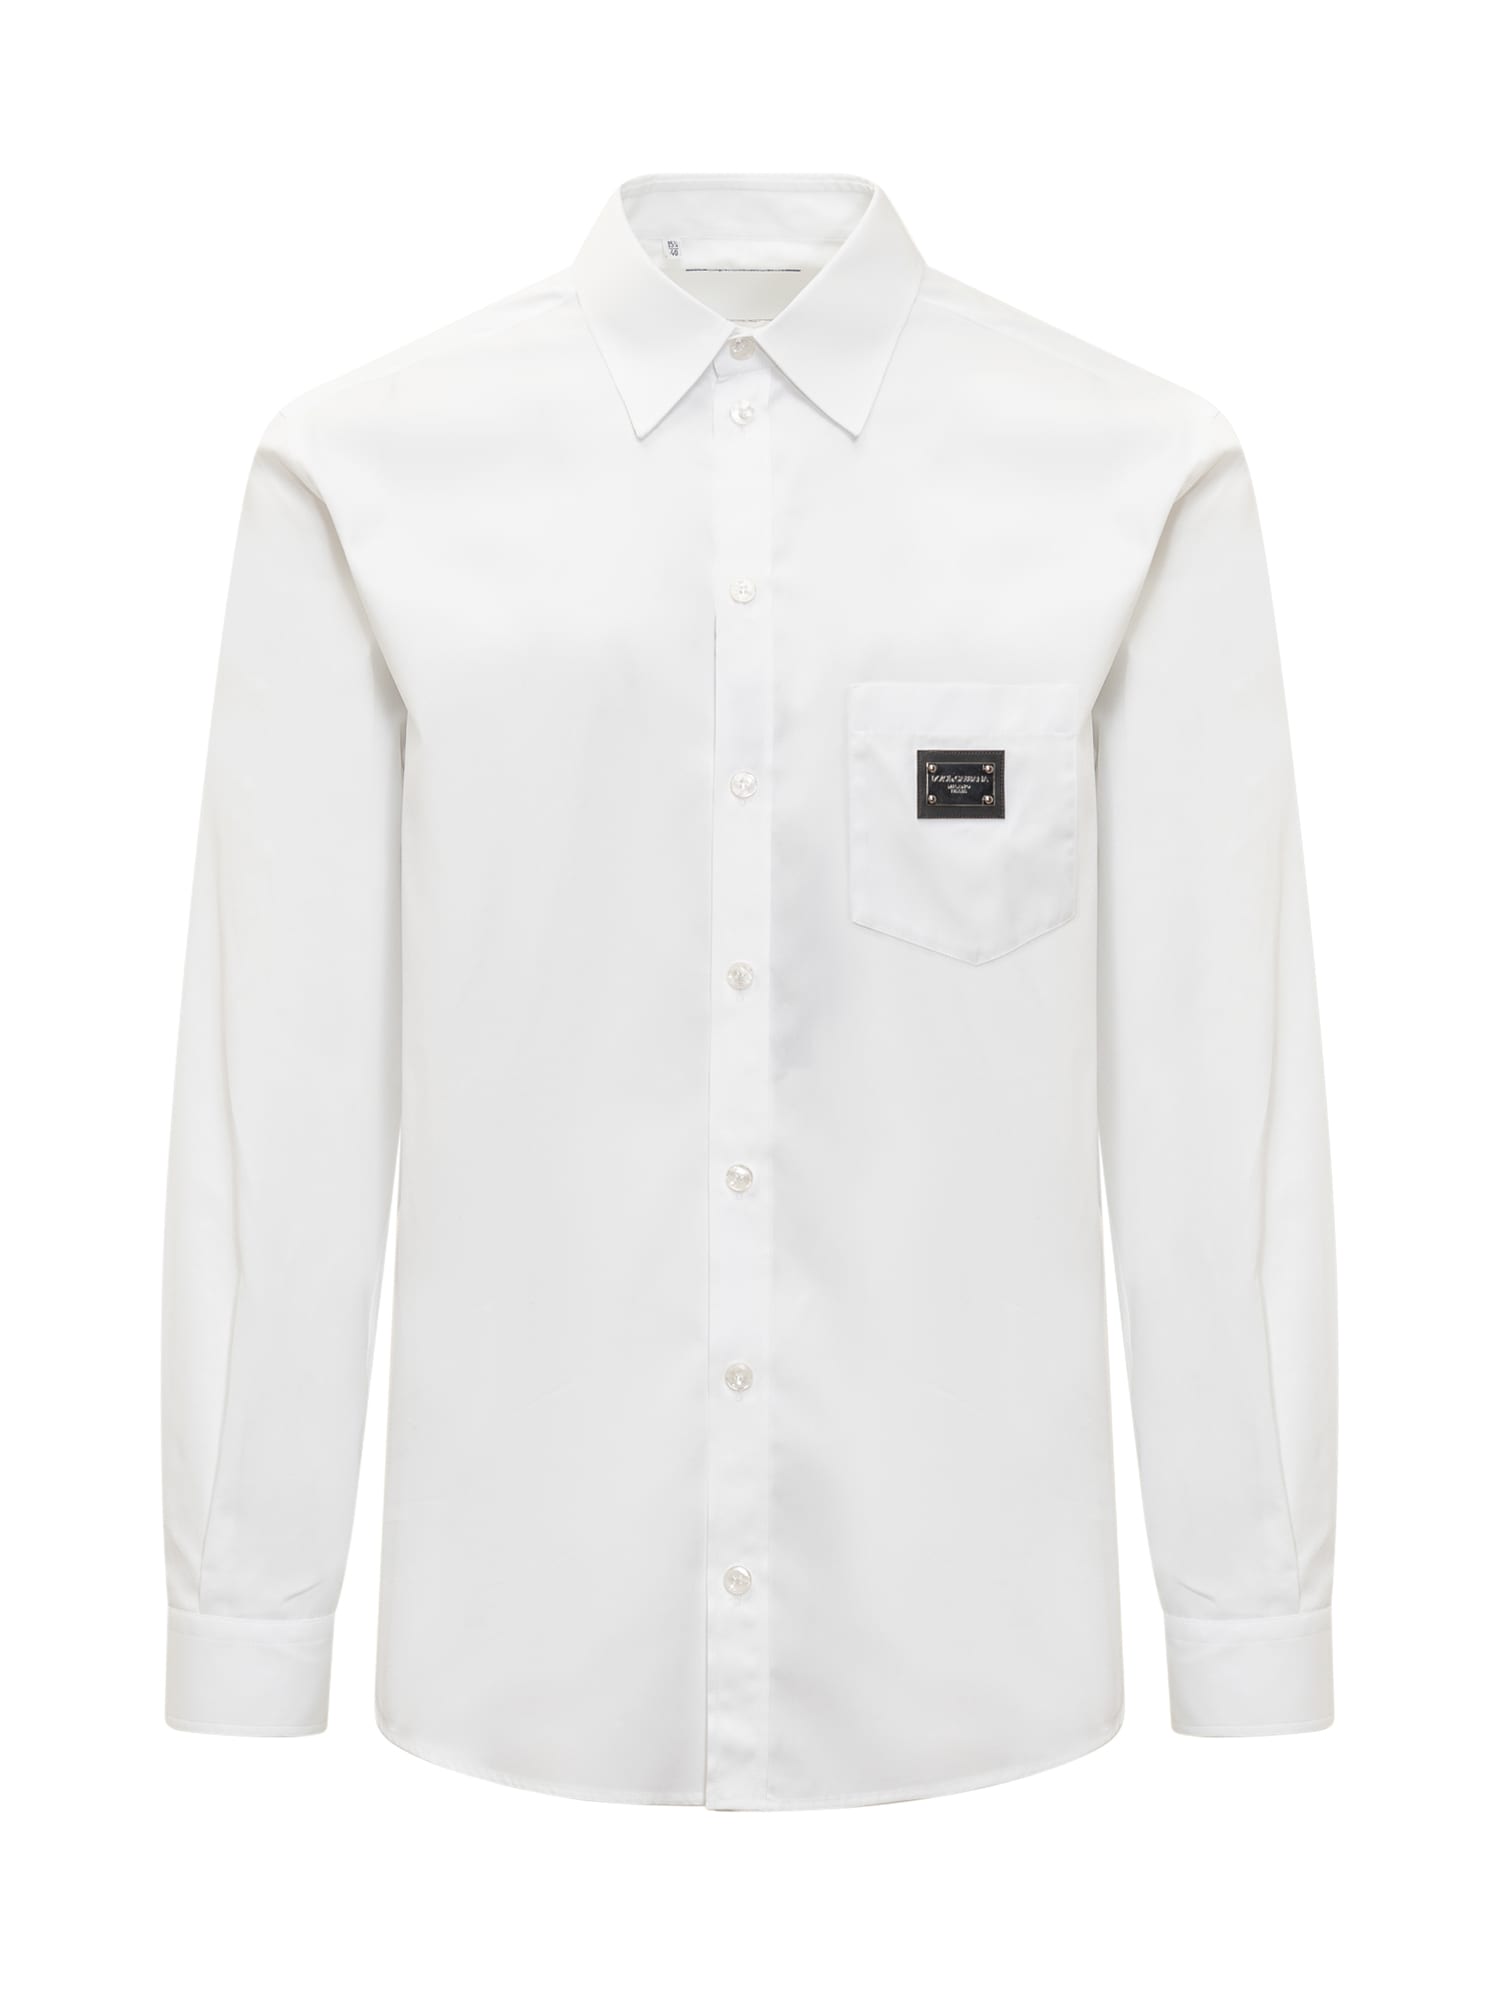 DOLCE & GABBANA SHIRT WITH LOGOED PLAQUE